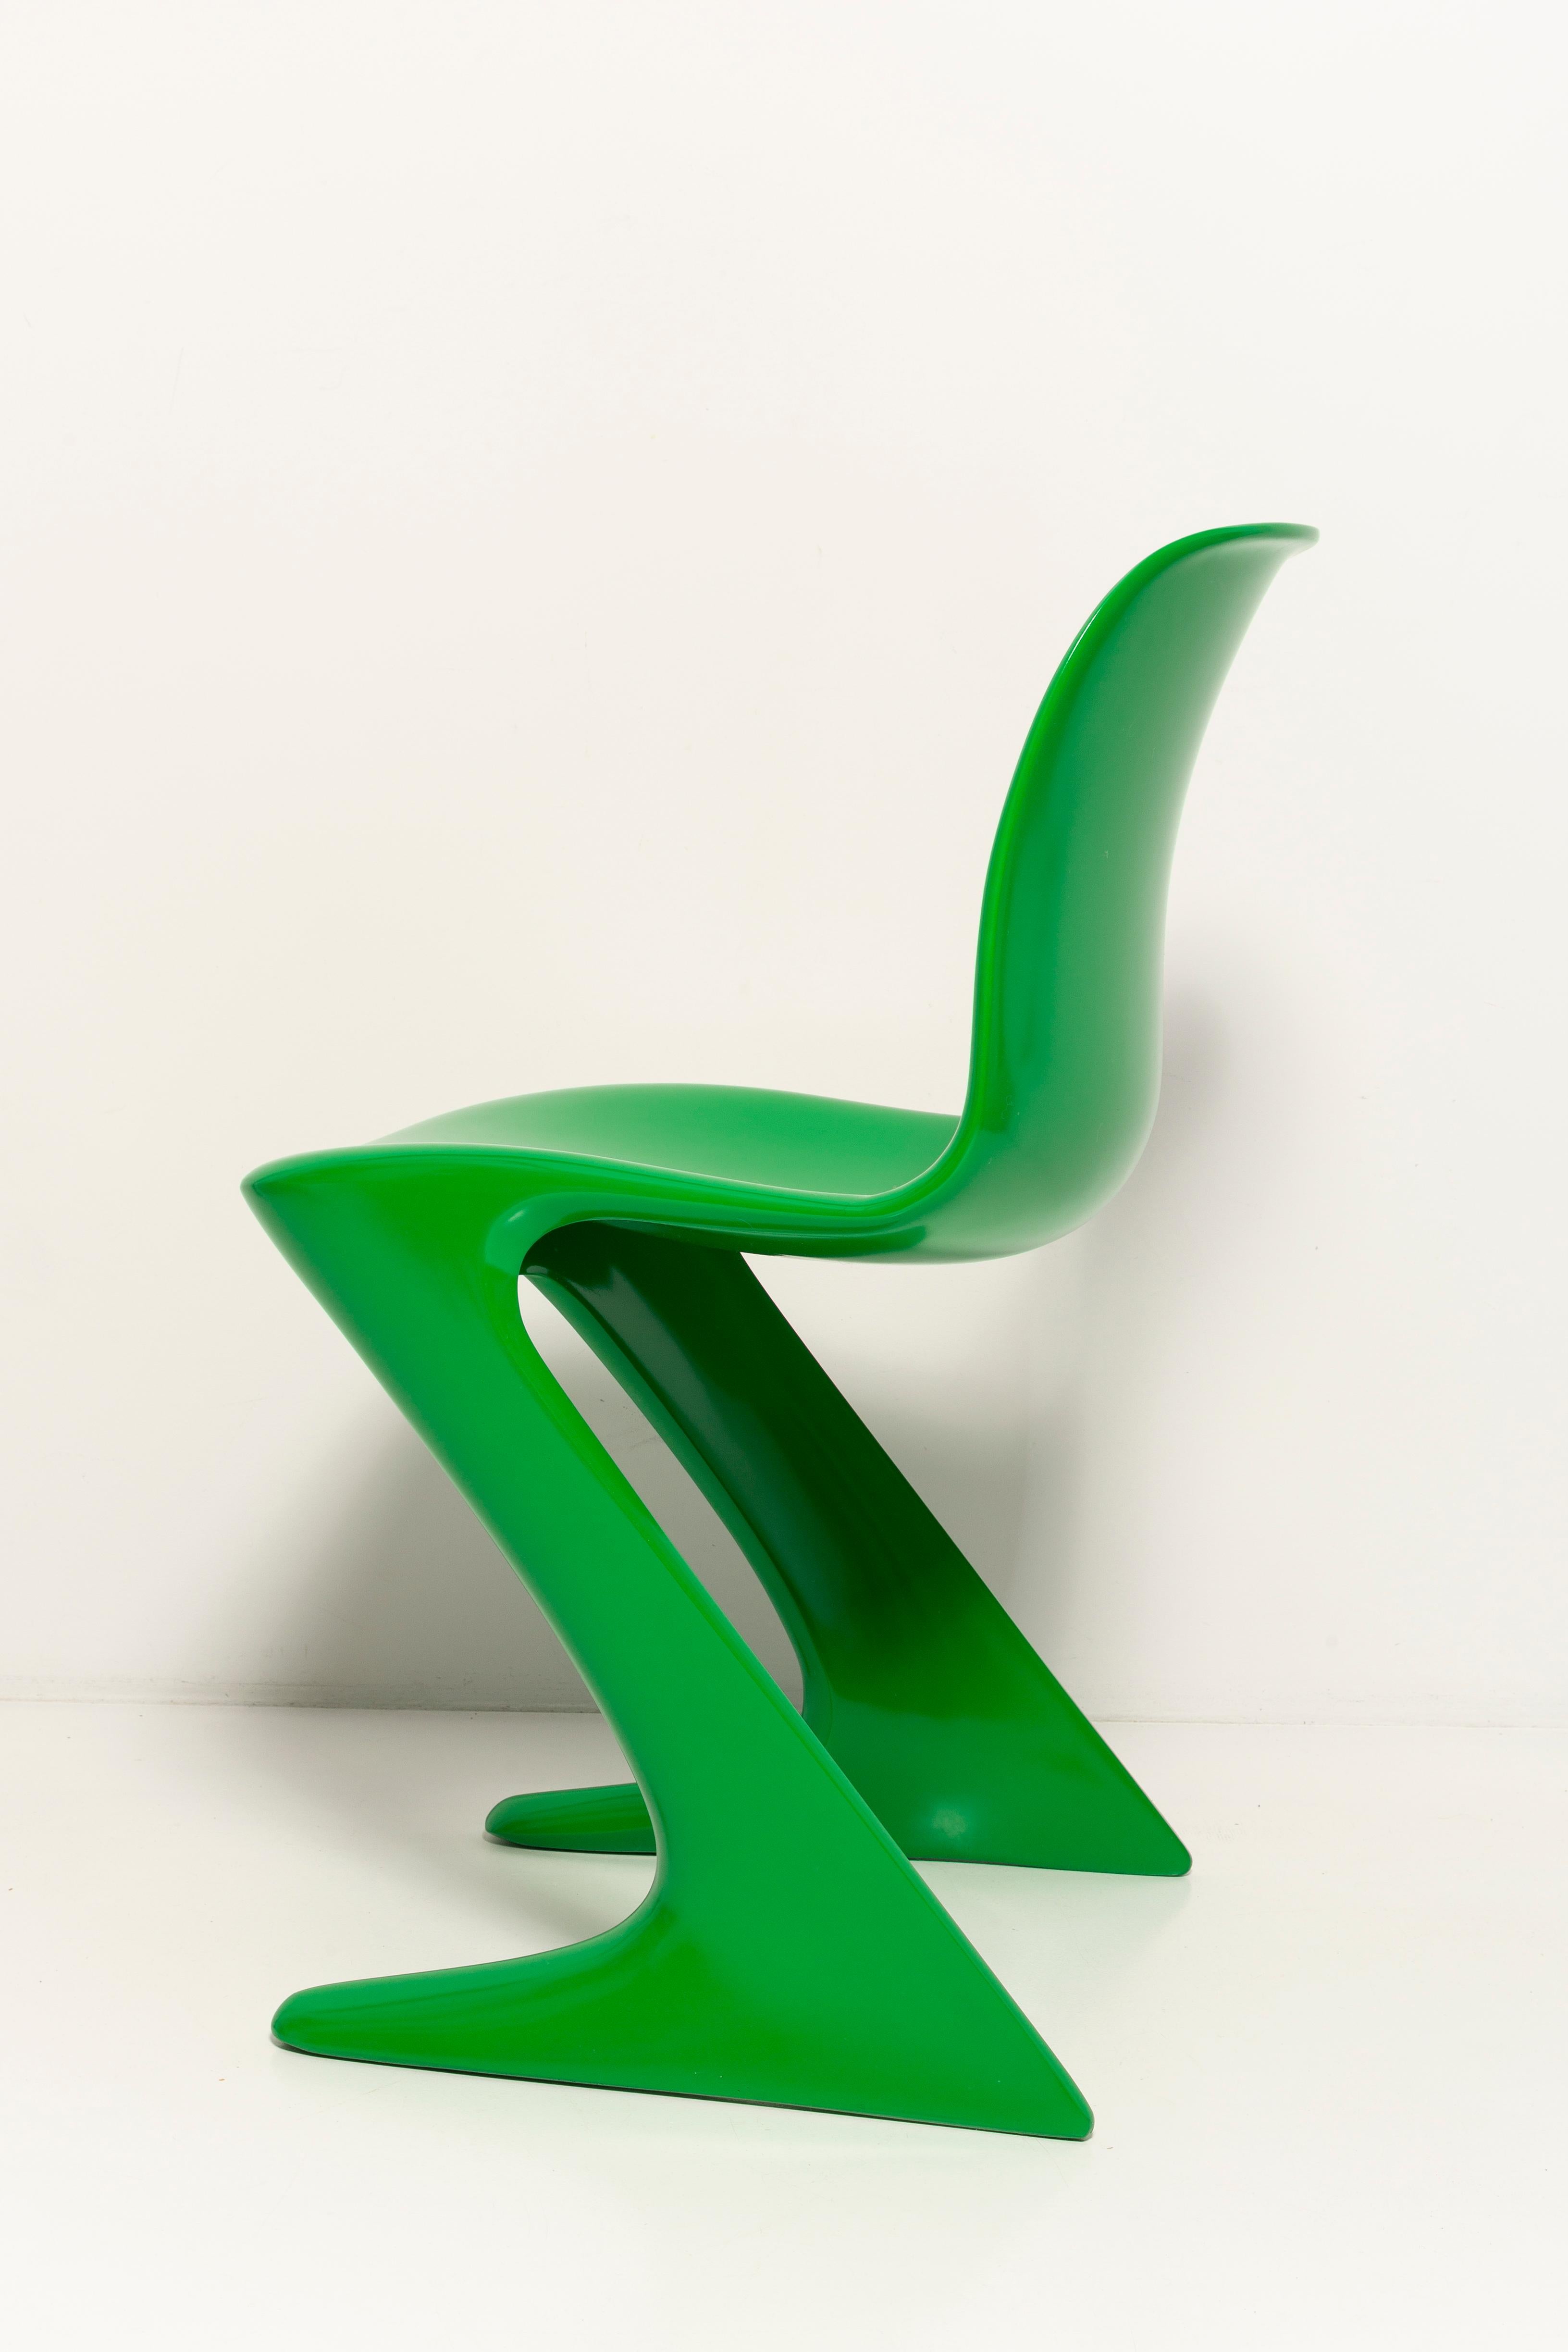 Fiberglass Set of Four Green Kangaroo Chairs Designed by Ernst Moeckl, Germany, 1960s For Sale